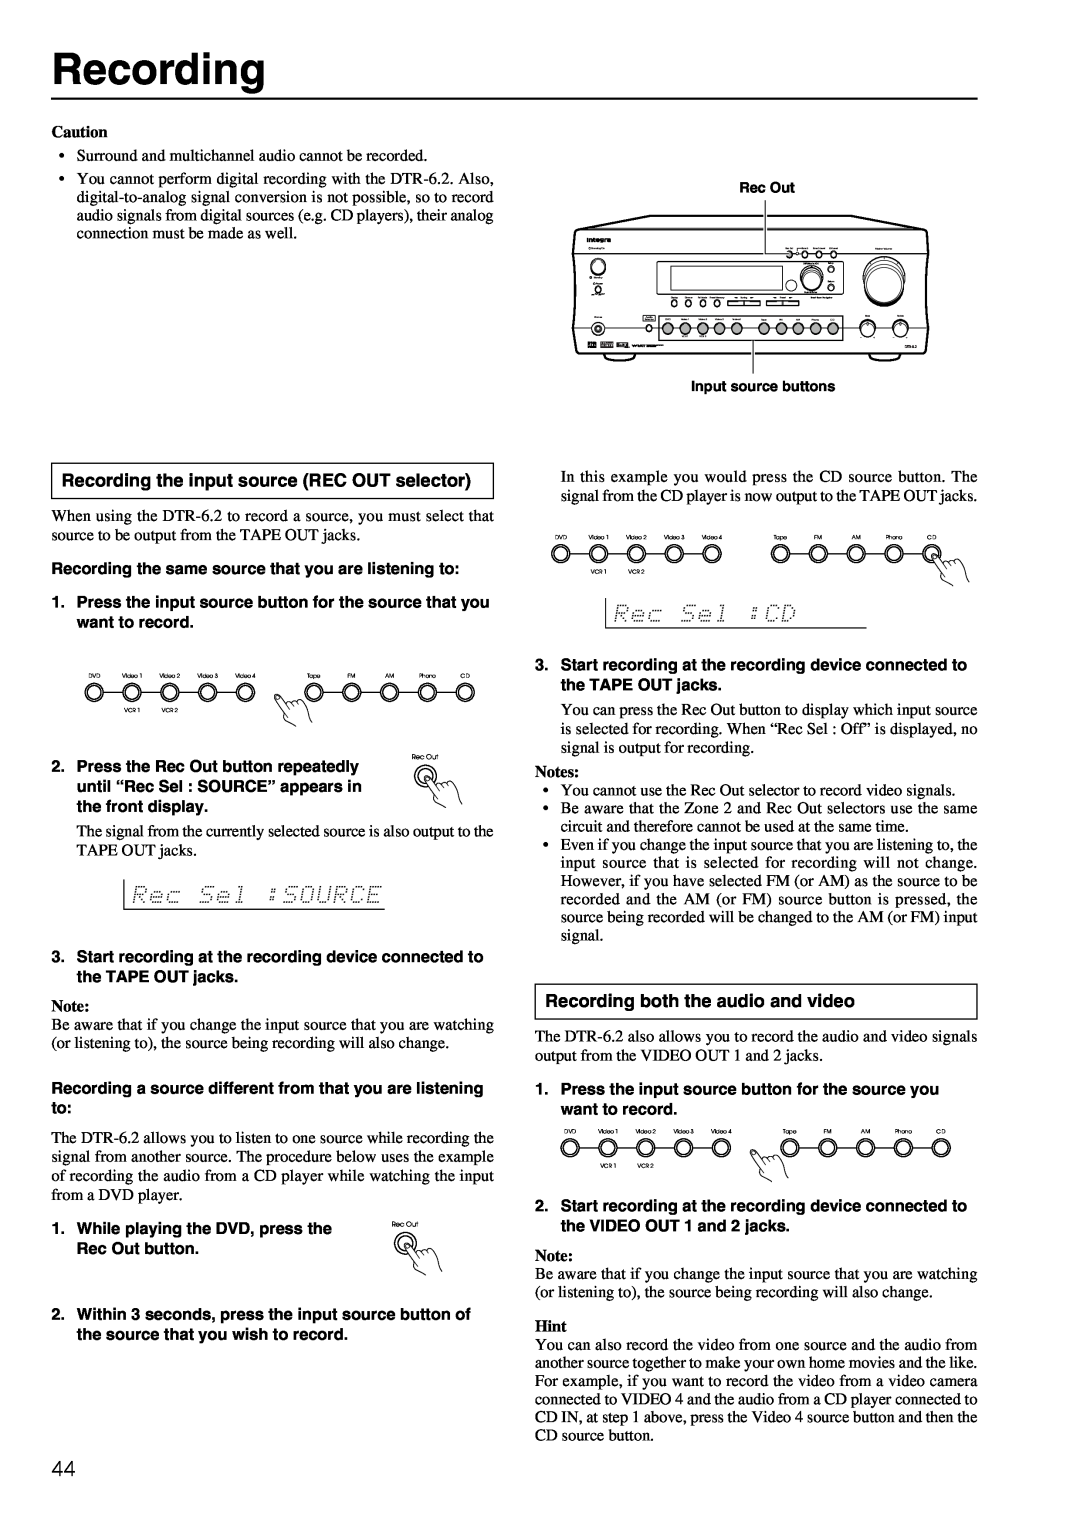 Integra DTR-6.2 instruction manual Recording the input source REC OUT selector, Recording both the audio and video 